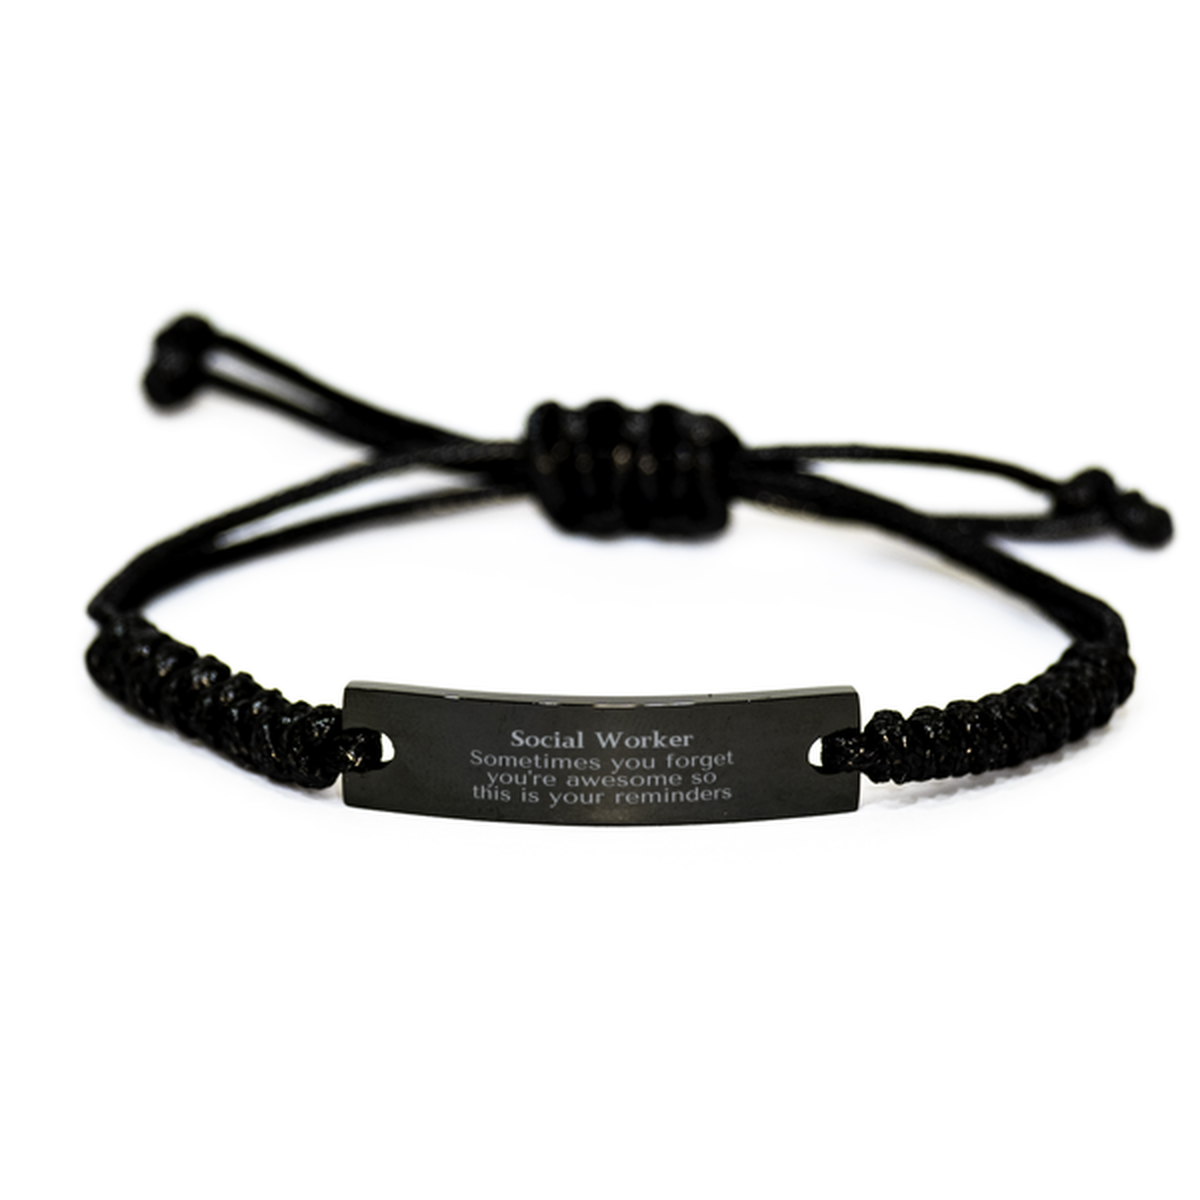 Sentimental Social Worker Black Rope Bracelet, Social Worker Sometimes you forget you're awesome so this is your reminders, Graduation Christmas Birthday Gifts for Social Worker, Men, Women, Coworkers